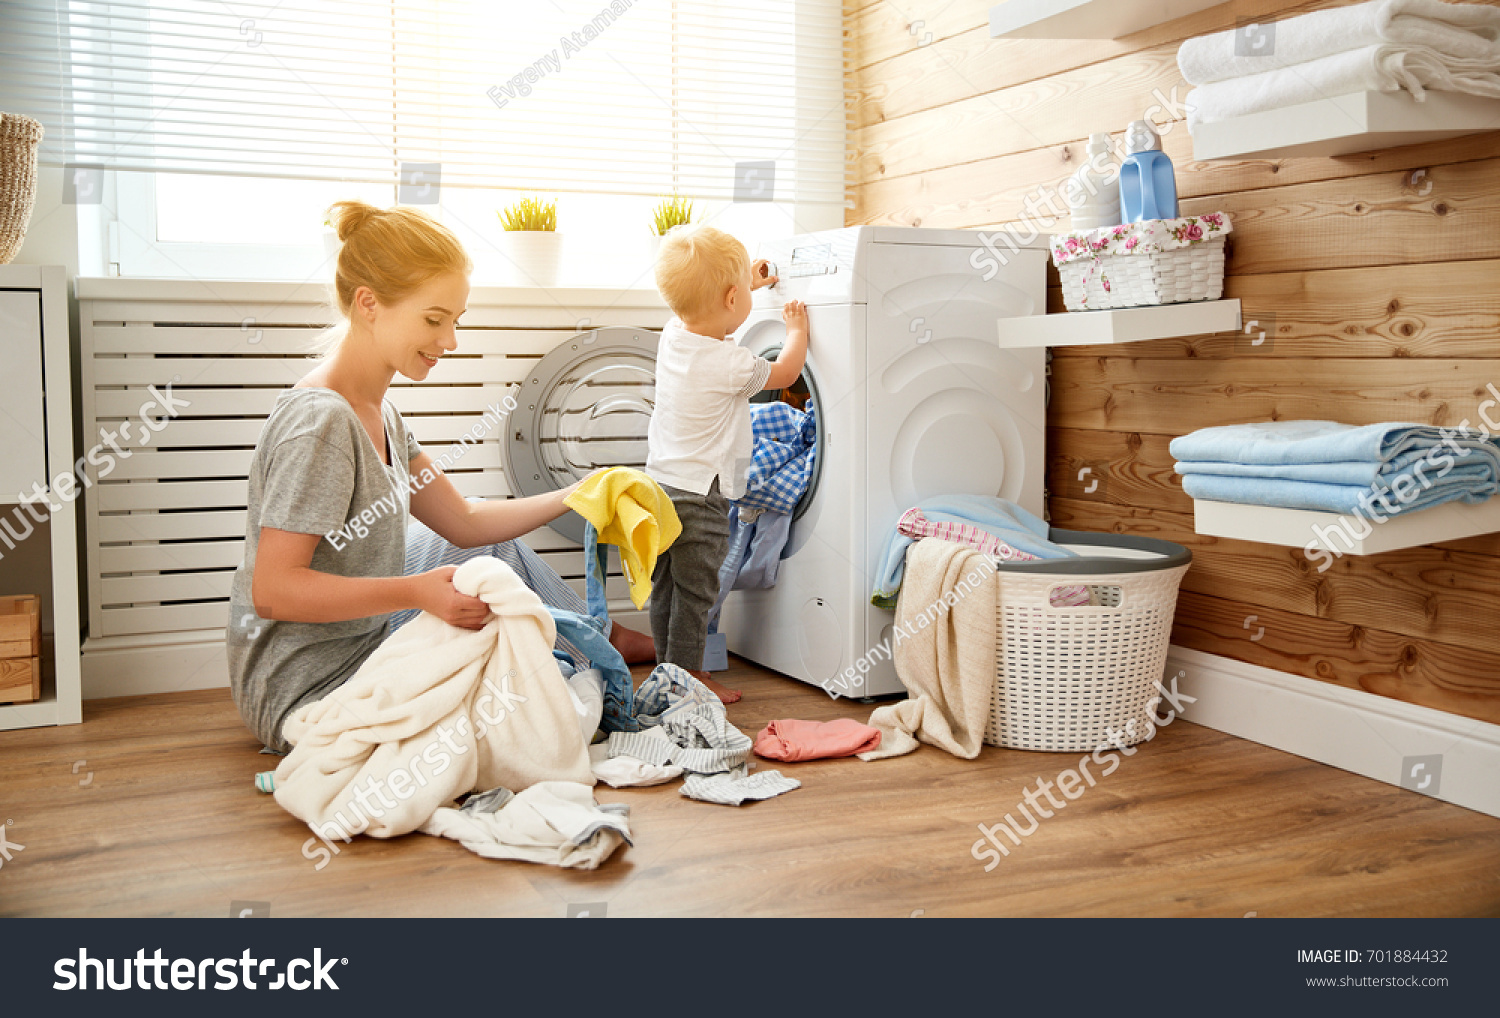 Happy family mother  housewife and children in the laundry load a washing machine
 #701884432